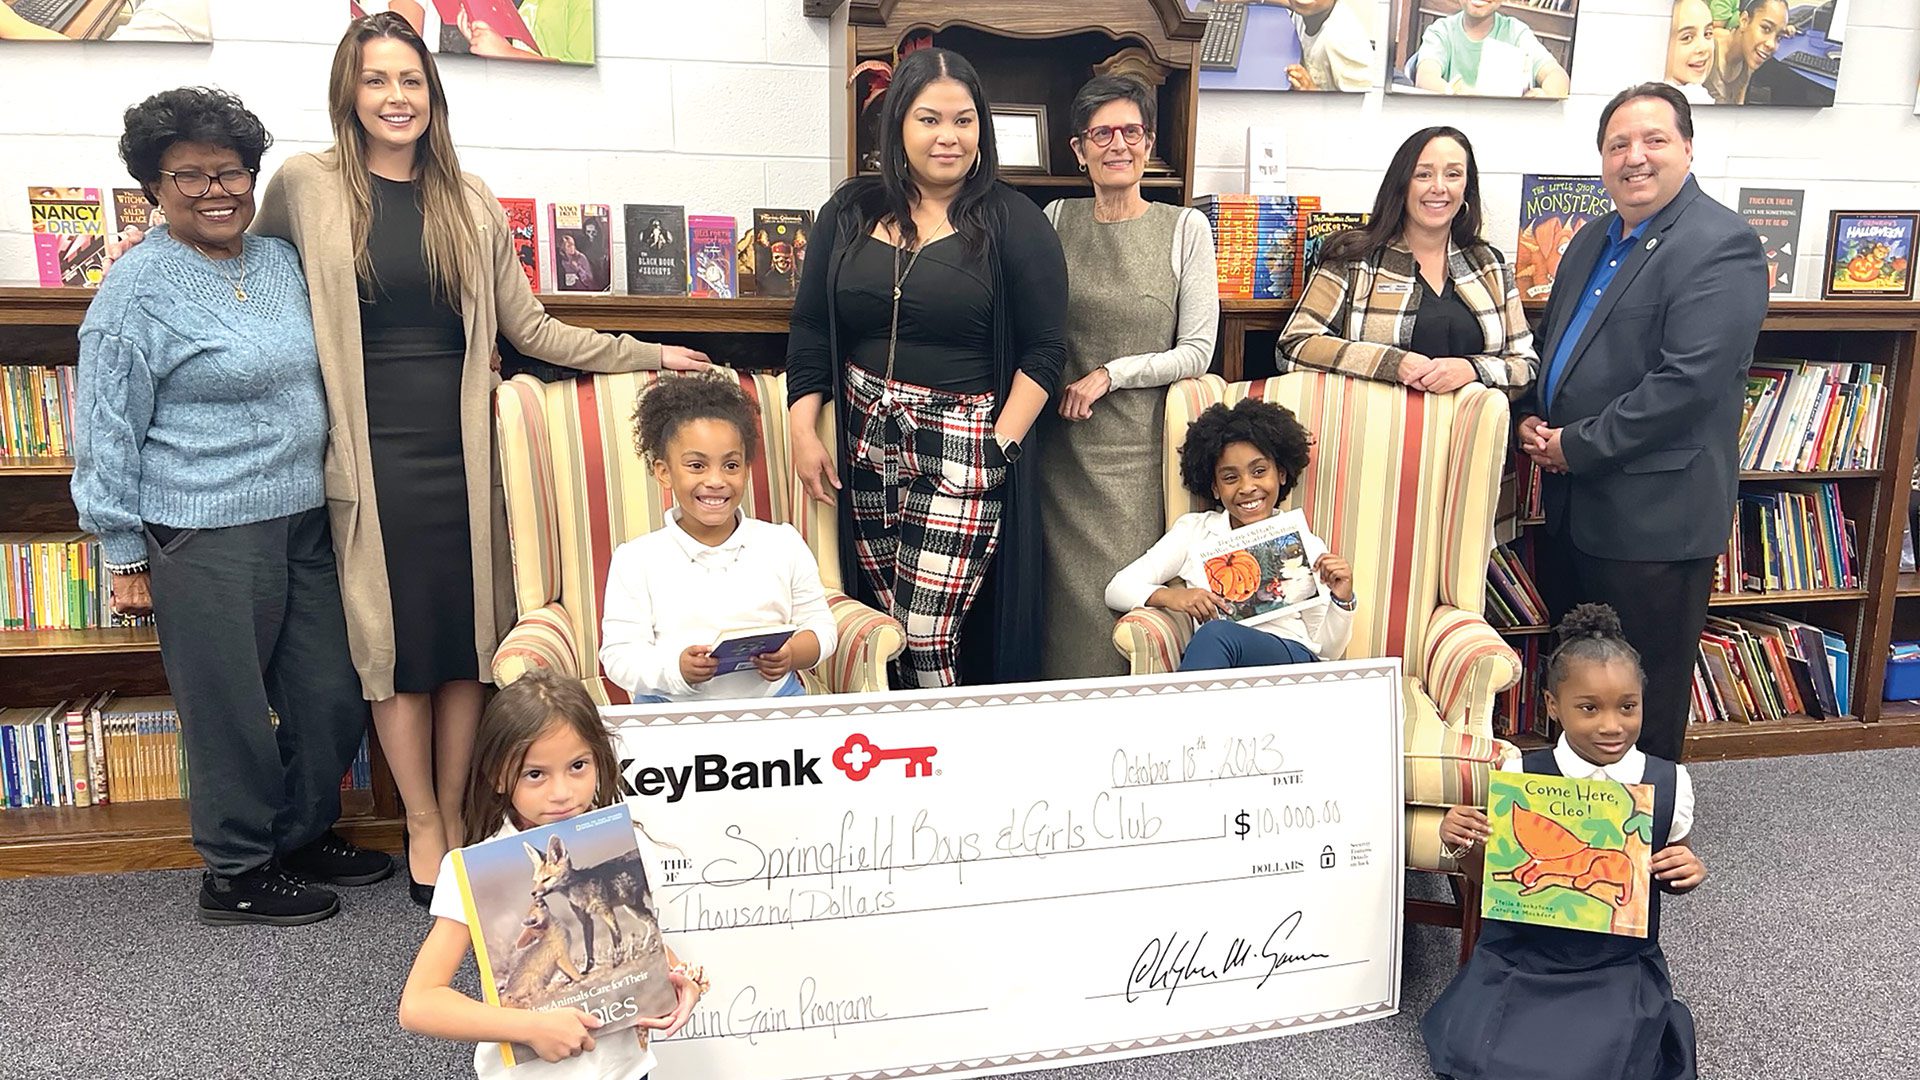 Pictured at top, from left: SBGC board member Aleana Laster; KeyBank Corporate Responsibility Officer Analisha Michanczyk, KeyBank Branch Manager Vanity Bryant, SBGC Director of Development Karen Natsios, KeyBank Area Retail Leader Sarah Germini, and SBGC Executive Director Vinnie Borello with students in the Brain Gain program